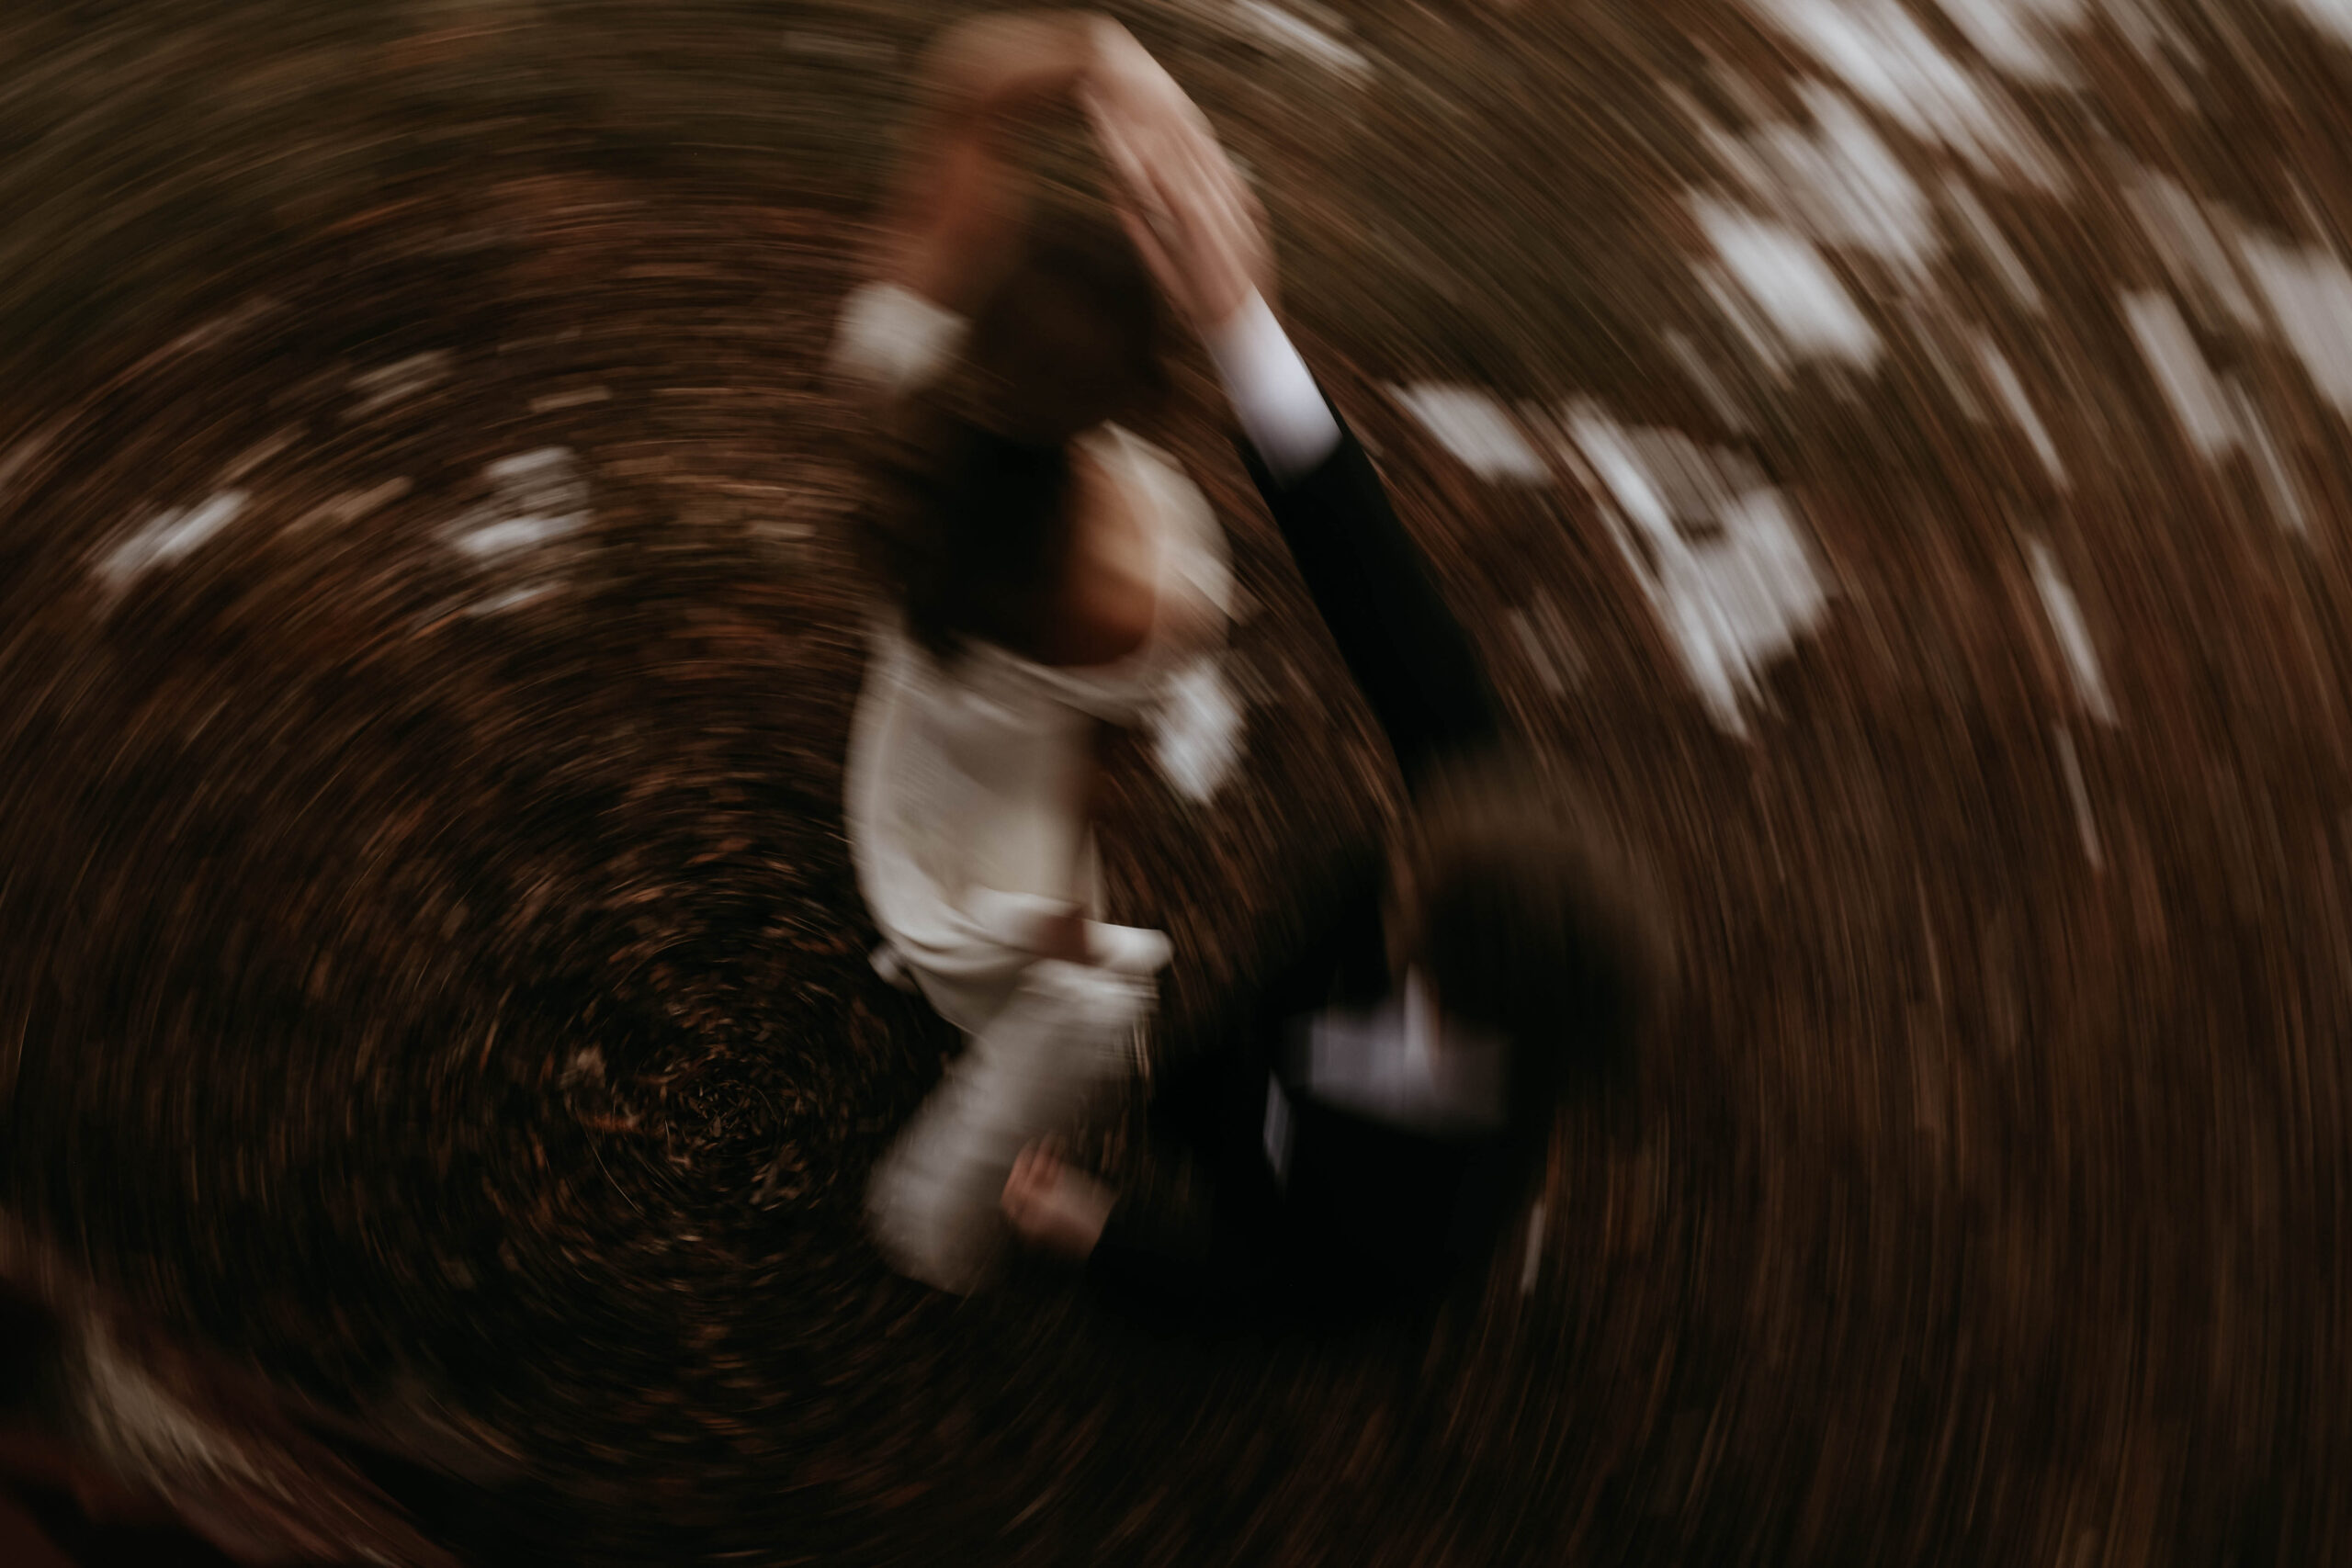 blurry aesthetic photo of groom spinning bride 